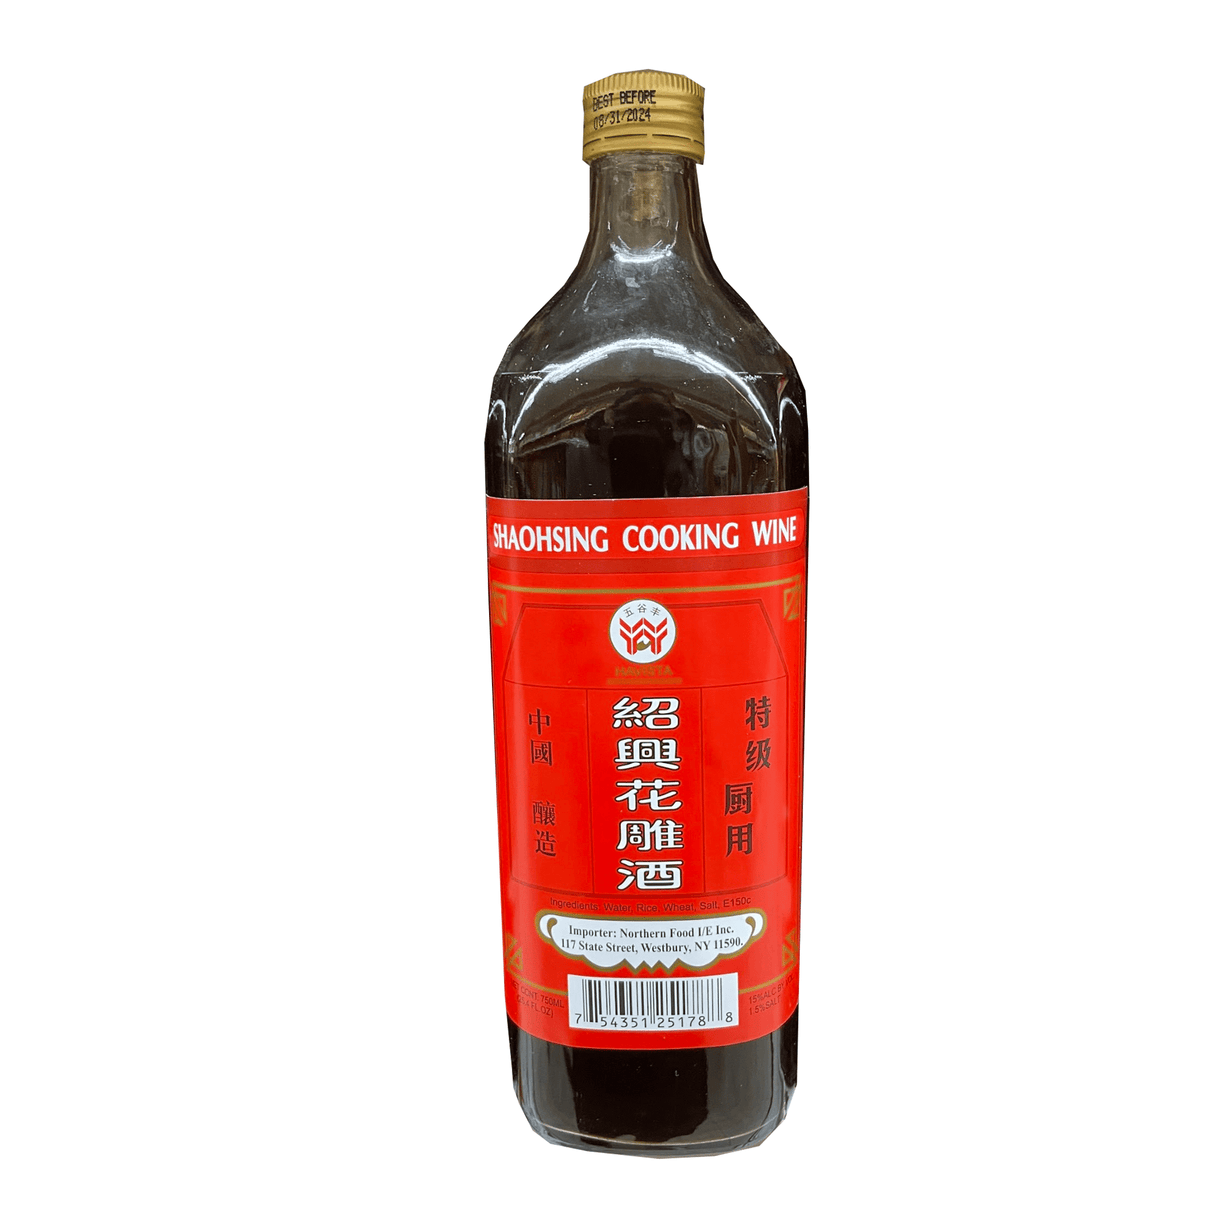 Shaohsing Cooking Wine